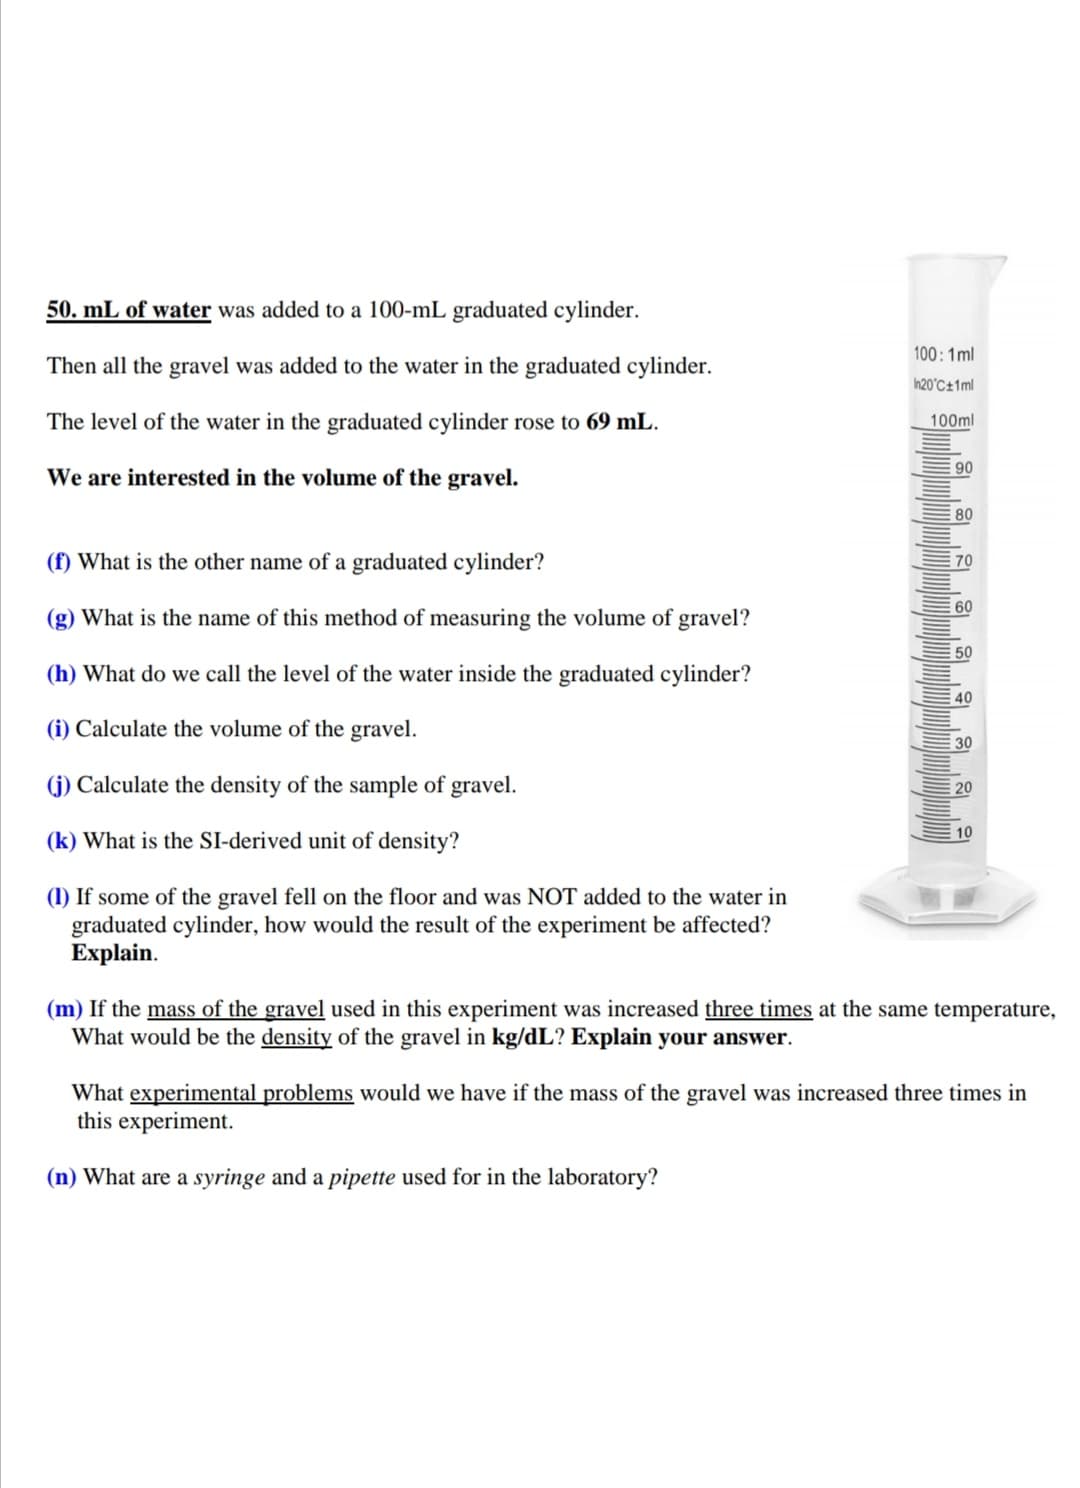 50. mL of water was added to a 100-mL graduated cylinder.
100:1ml
Then all the gravel was added to the water in the graduated cylinder.
h20°C±1ml
The level of the water in the graduated cylinder rose to 69 mL.
100ml
90
We are interested in the volume of the gravel.
80
(f) What is the other name of a graduated cylinder?
E 70
E 60
(g) What is the name of this method of measuring the volume of gravel?
50
(h) What do we call the level of the water inside the graduated cylinder?
E 40
(i) Calculate the volume of the gravel.
30
(j) Calculate the density of the sample of gravel.
20
10
(k) What is the SI-derived unit of density?
(1) If some of the gravel fell on the floor and was NOT added to the water in
graduated cylinder, how would the result of the experiment be affected?
Explain.
(m) If the mass of the gravel used in this experiment was increased three times at the same temperature,
What would be the density of the gravel in kg/dL? Explain your answer.
What experimental problems would we have if the mass of the gravel was increased three times in
this experiment.
(n) What are a syringe and a pipette used for in the laboratory?
